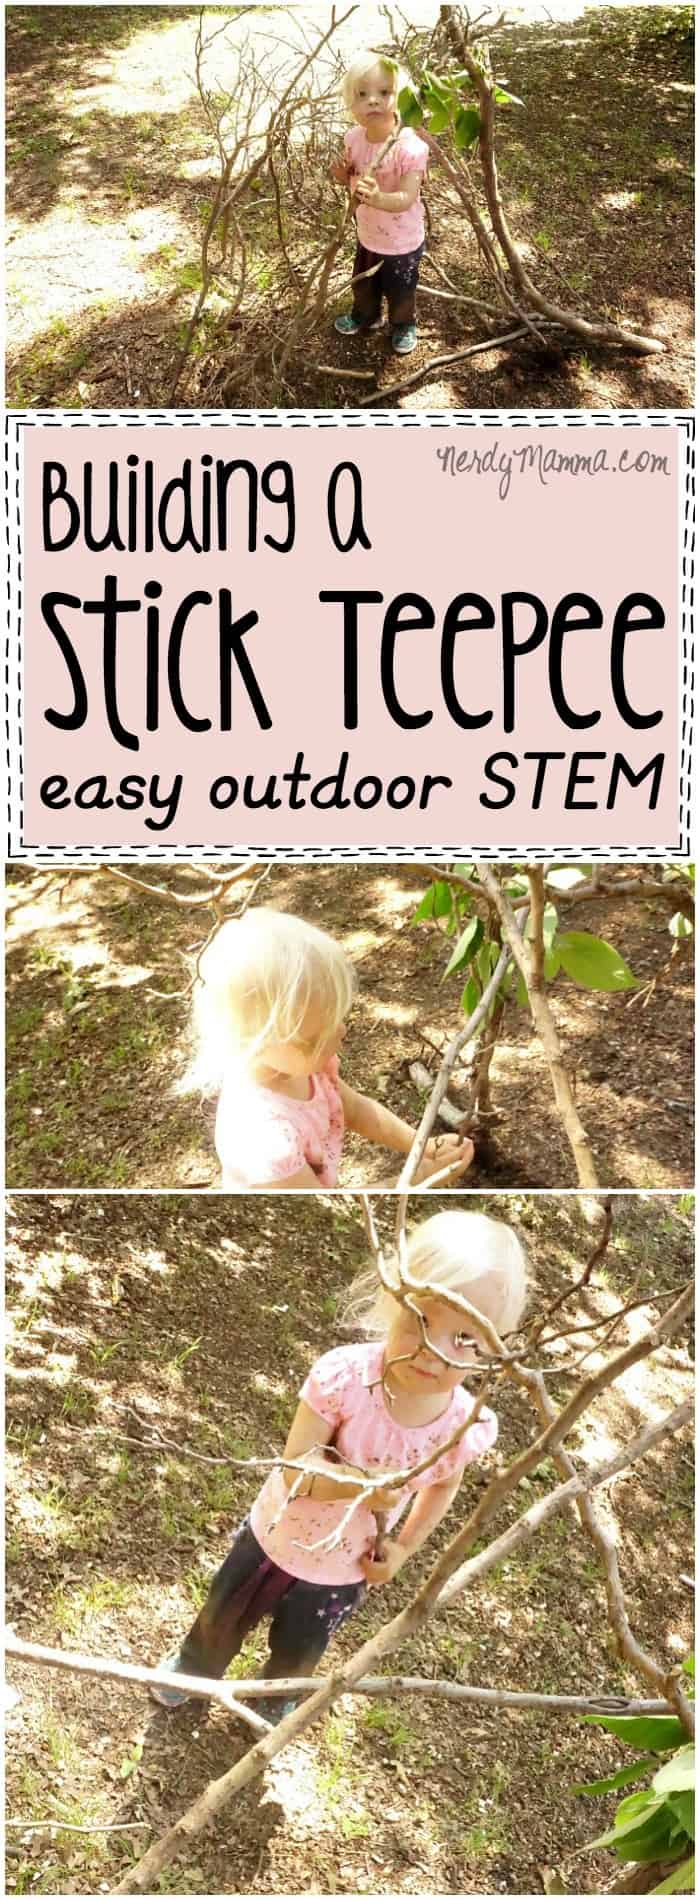 I love this idea for an easy outdoor STEM project! So much fun this toddler is having building a stick teepee! Who knew! LOL!